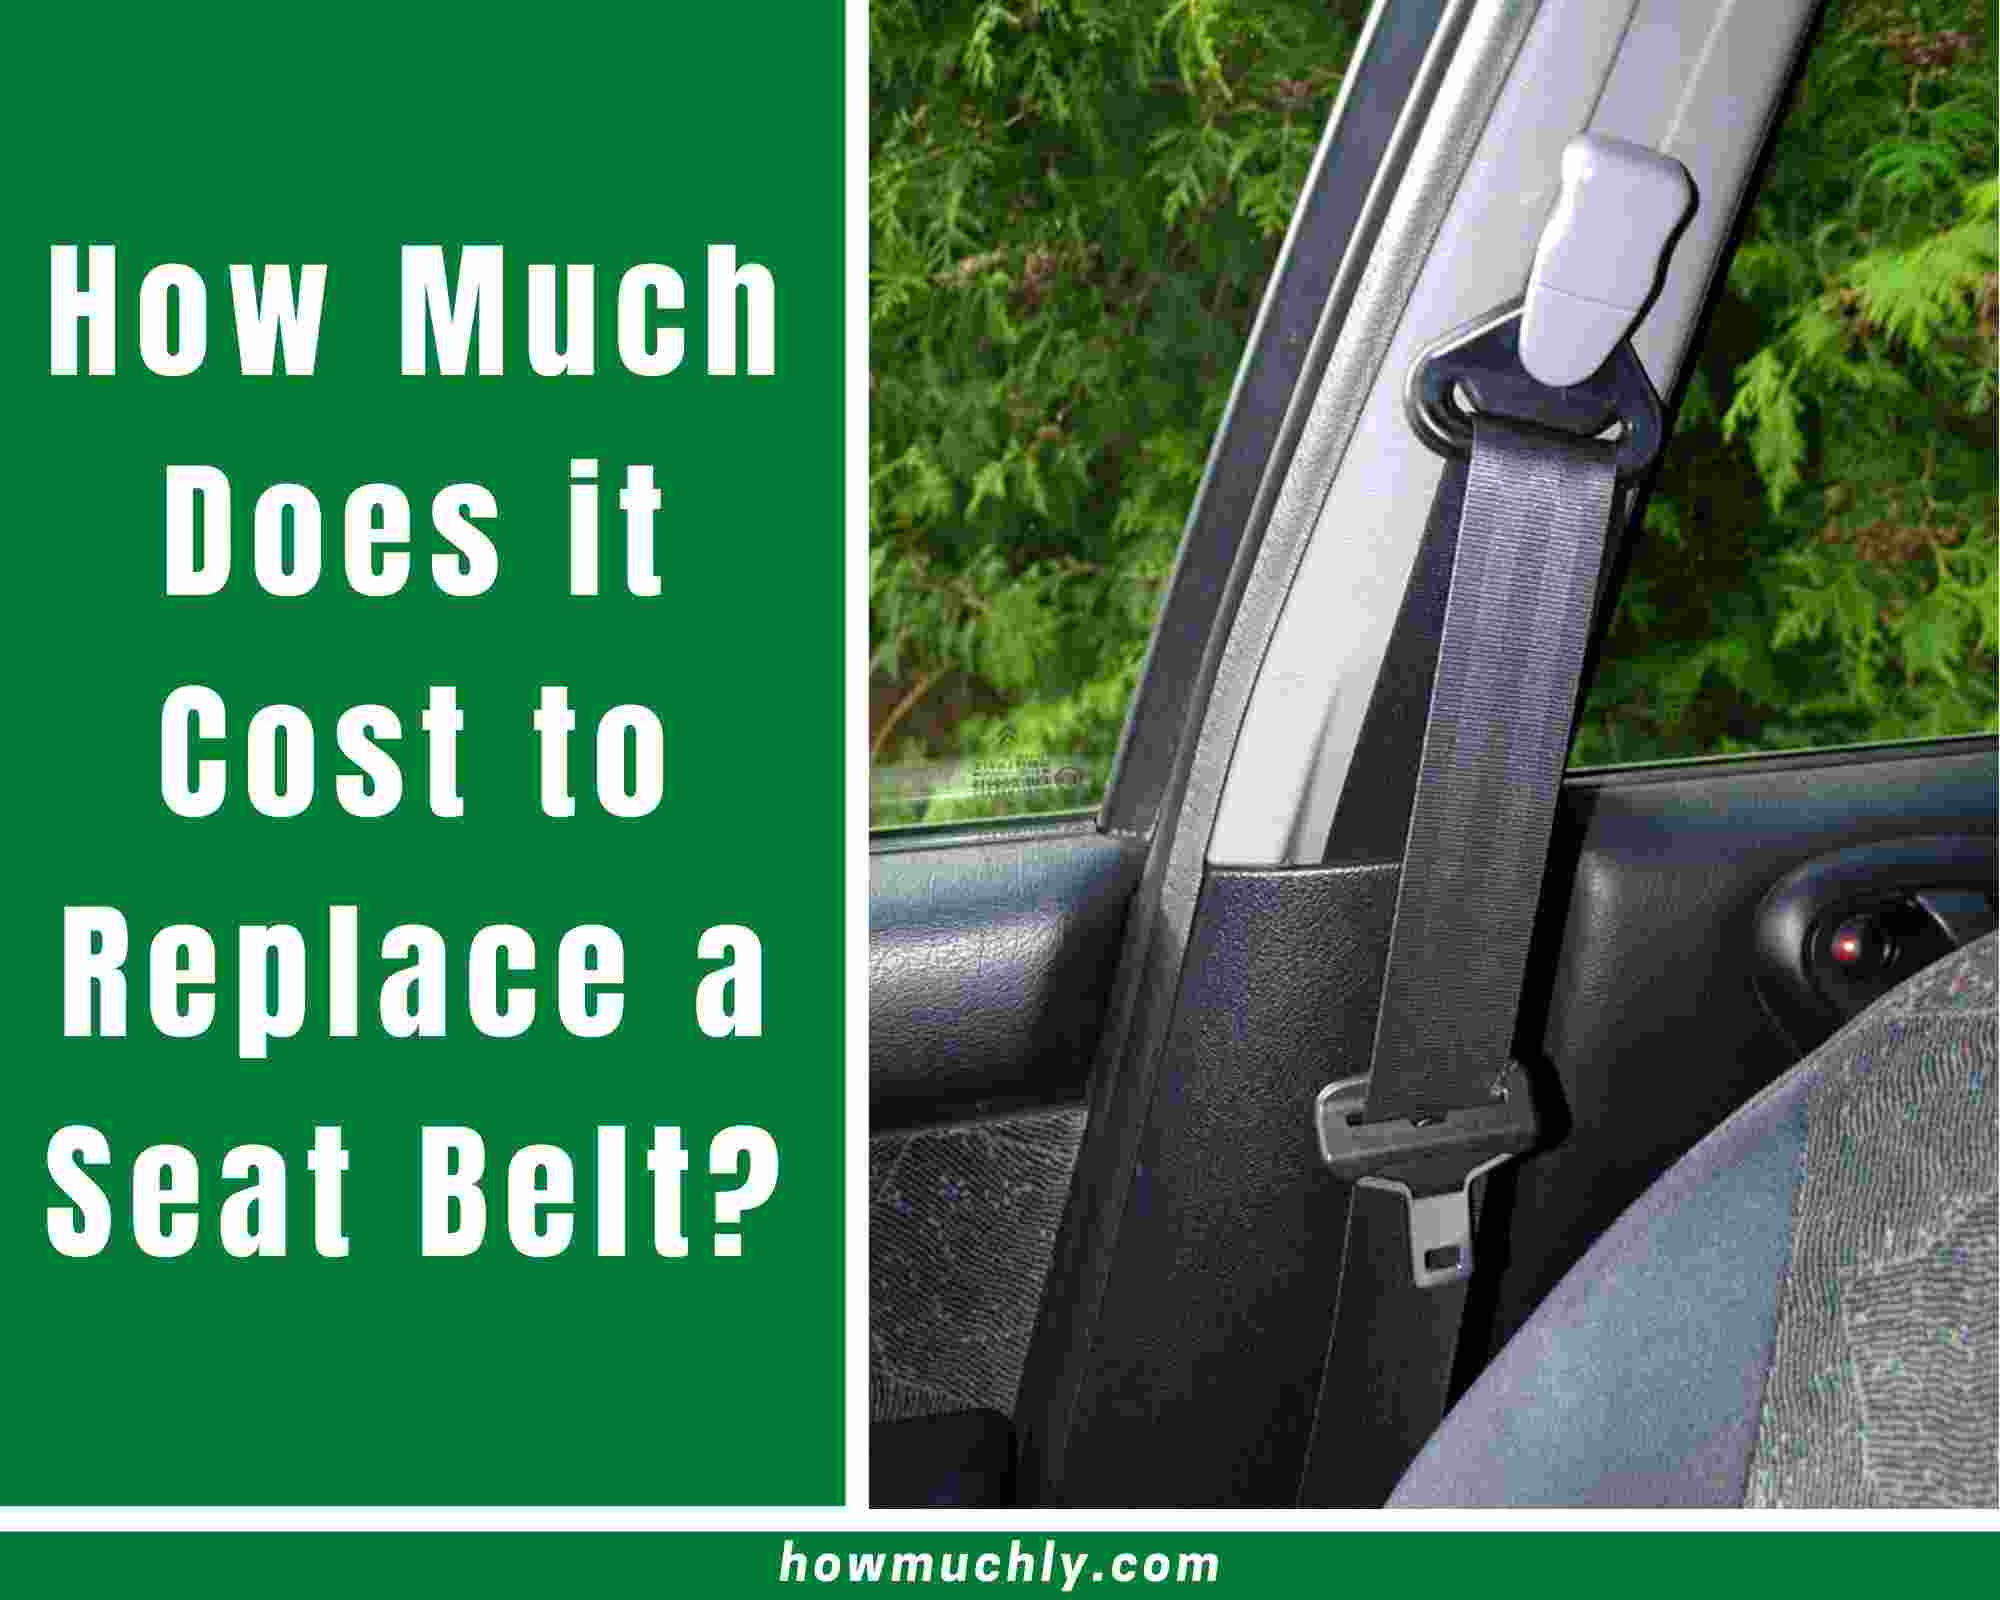 Cost To Replace A Seat Belt, How Much Does It Cost To Fix A Car Seat Belt